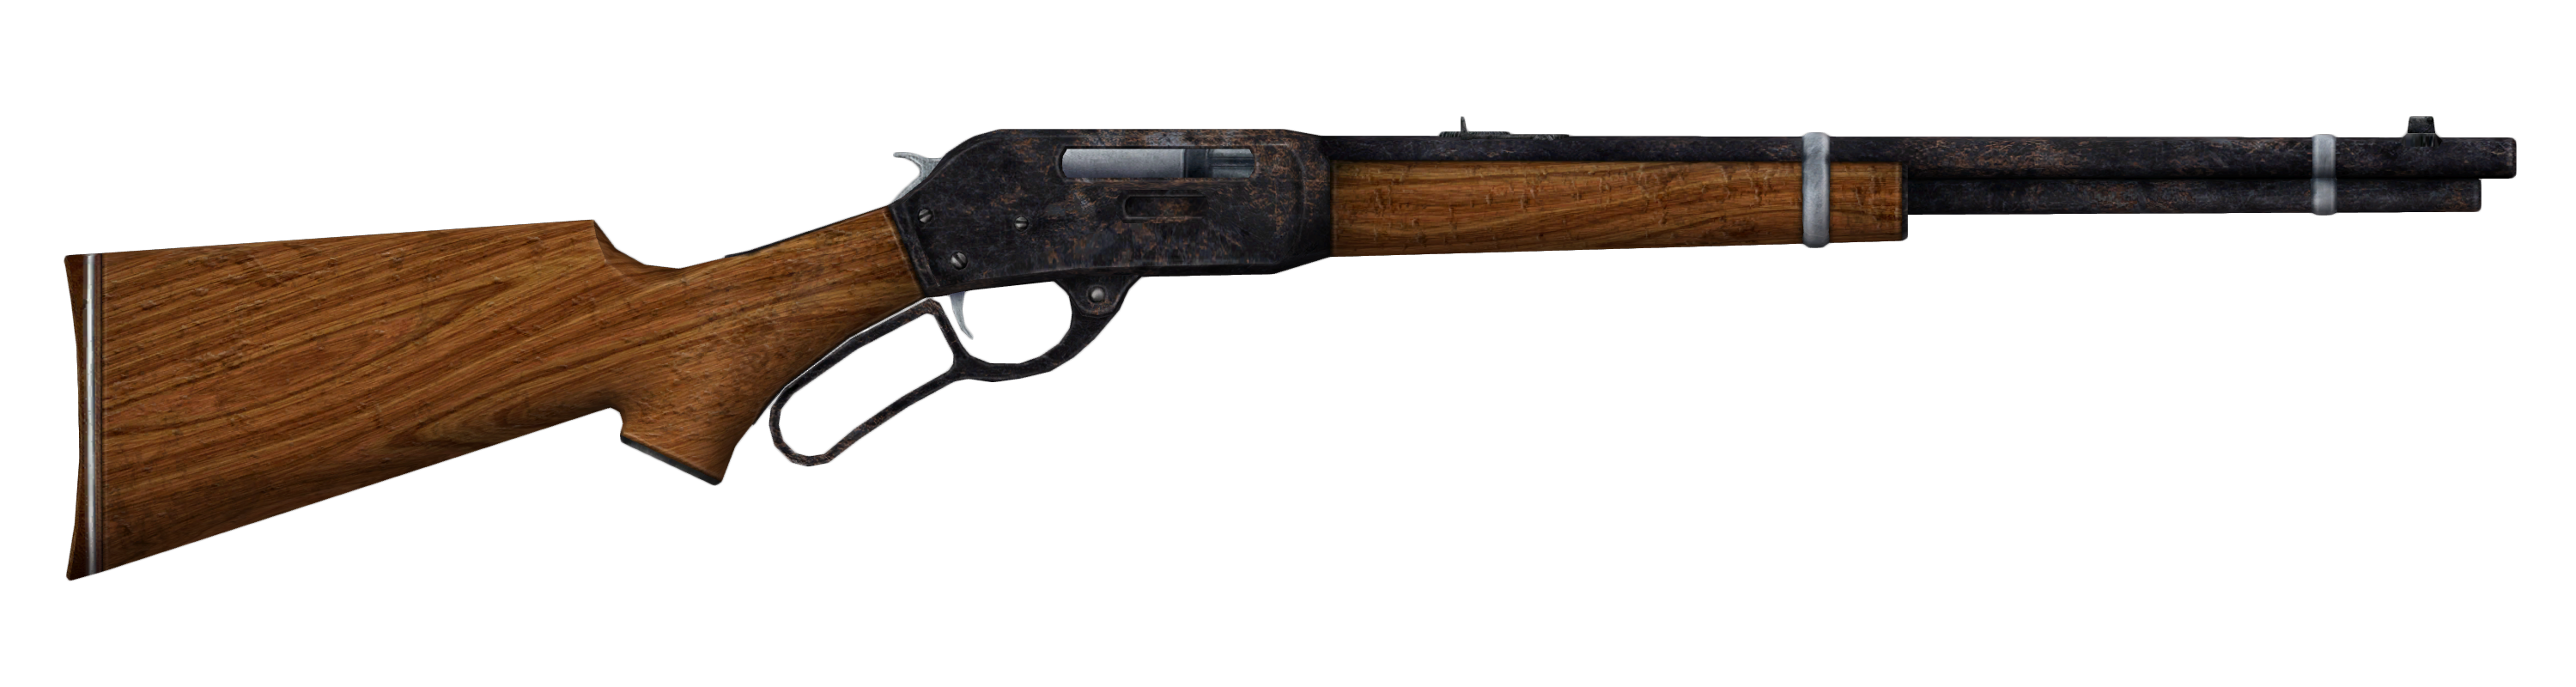 fallout 4 lever action